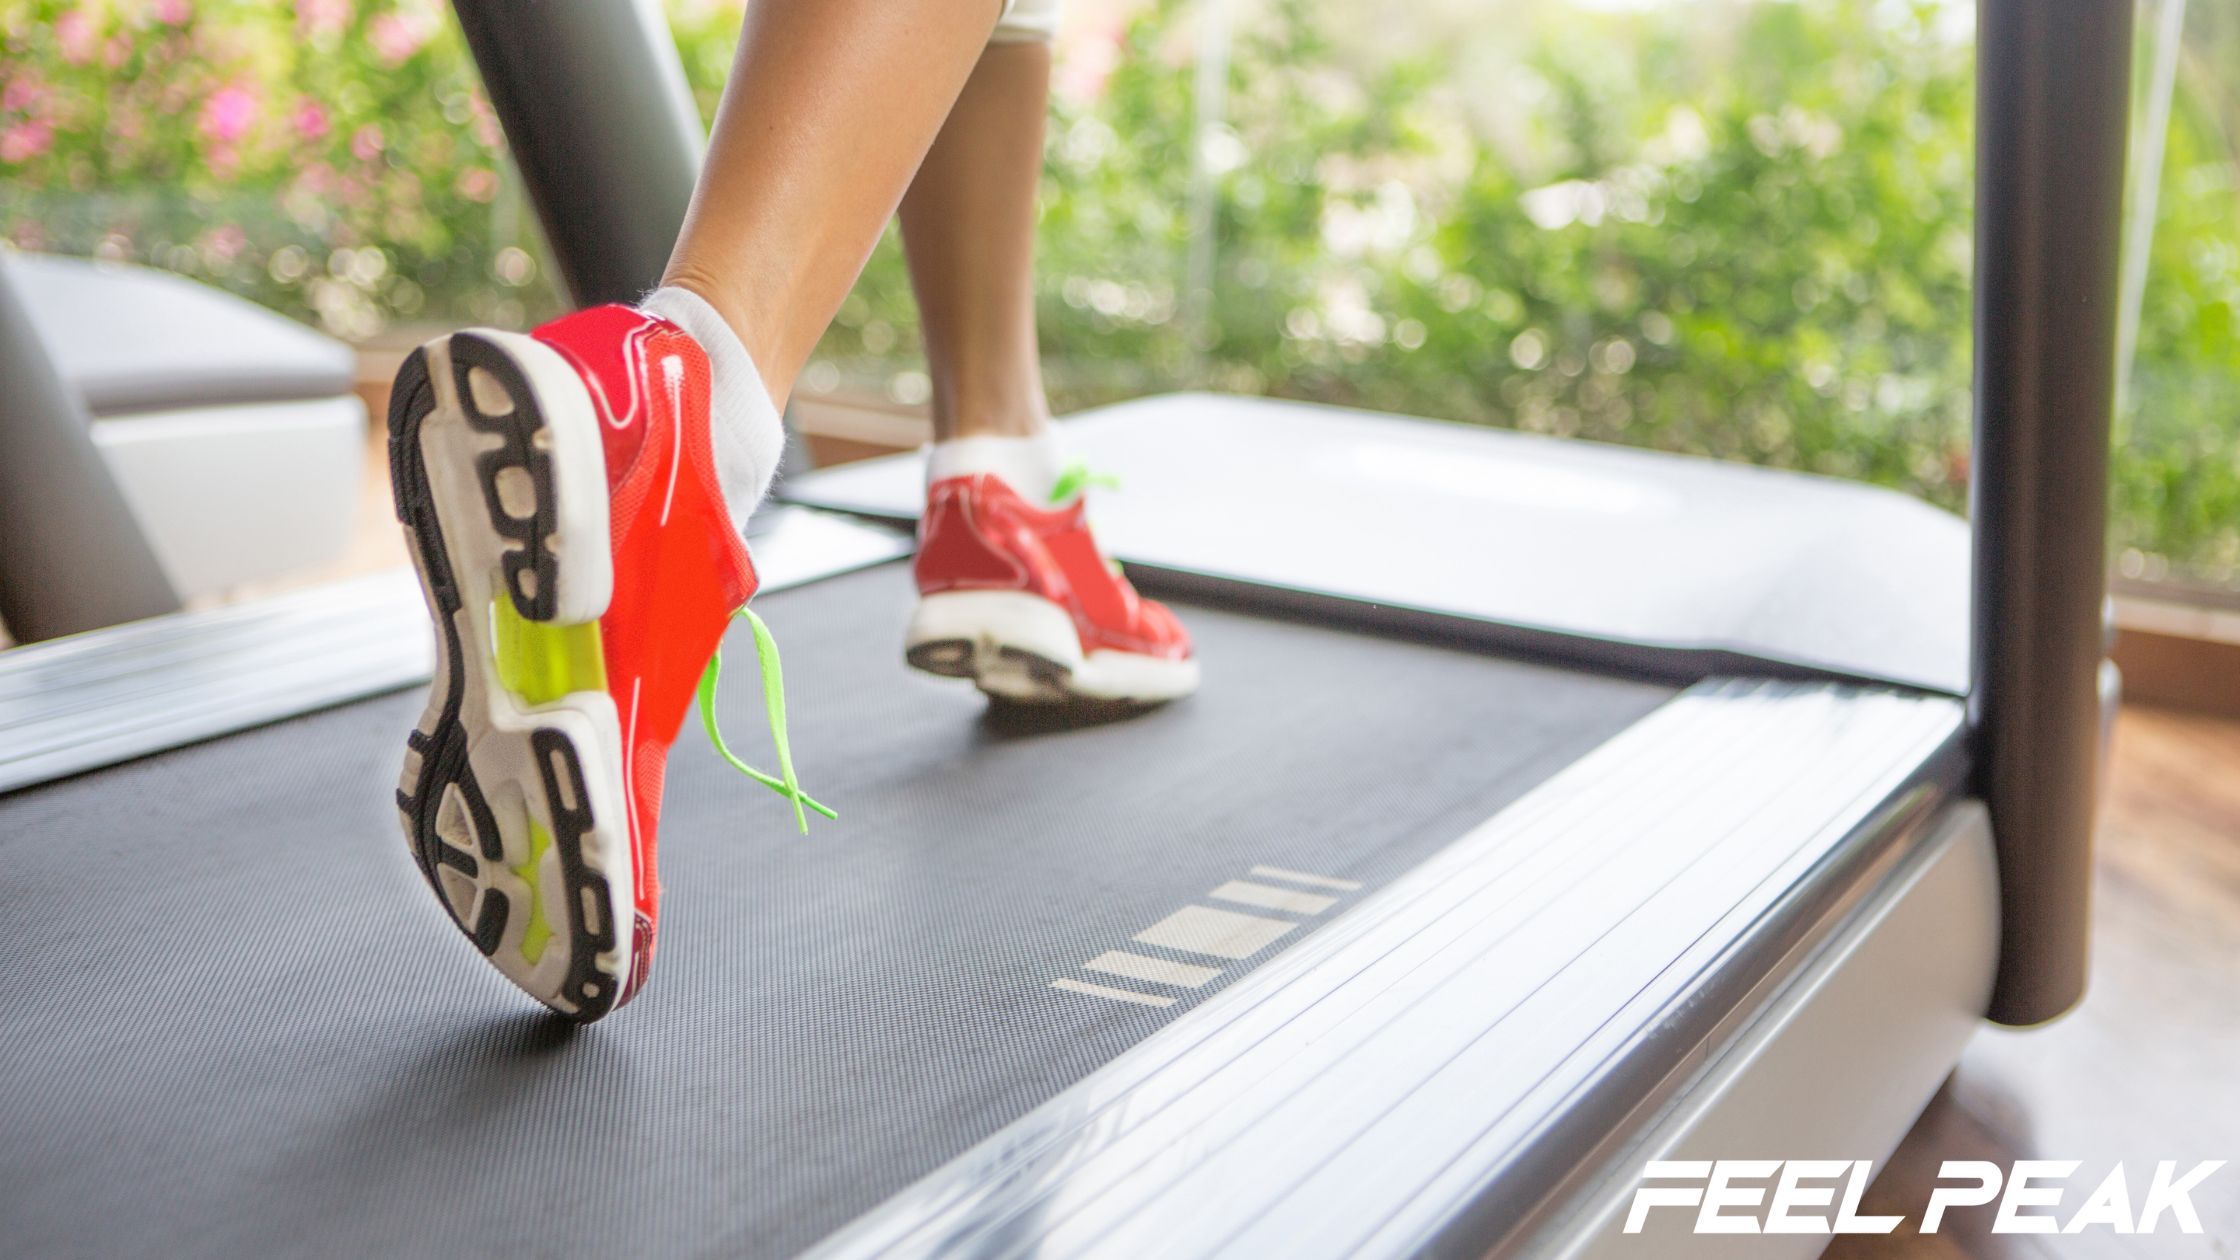 Best Treadmills For Home feature image